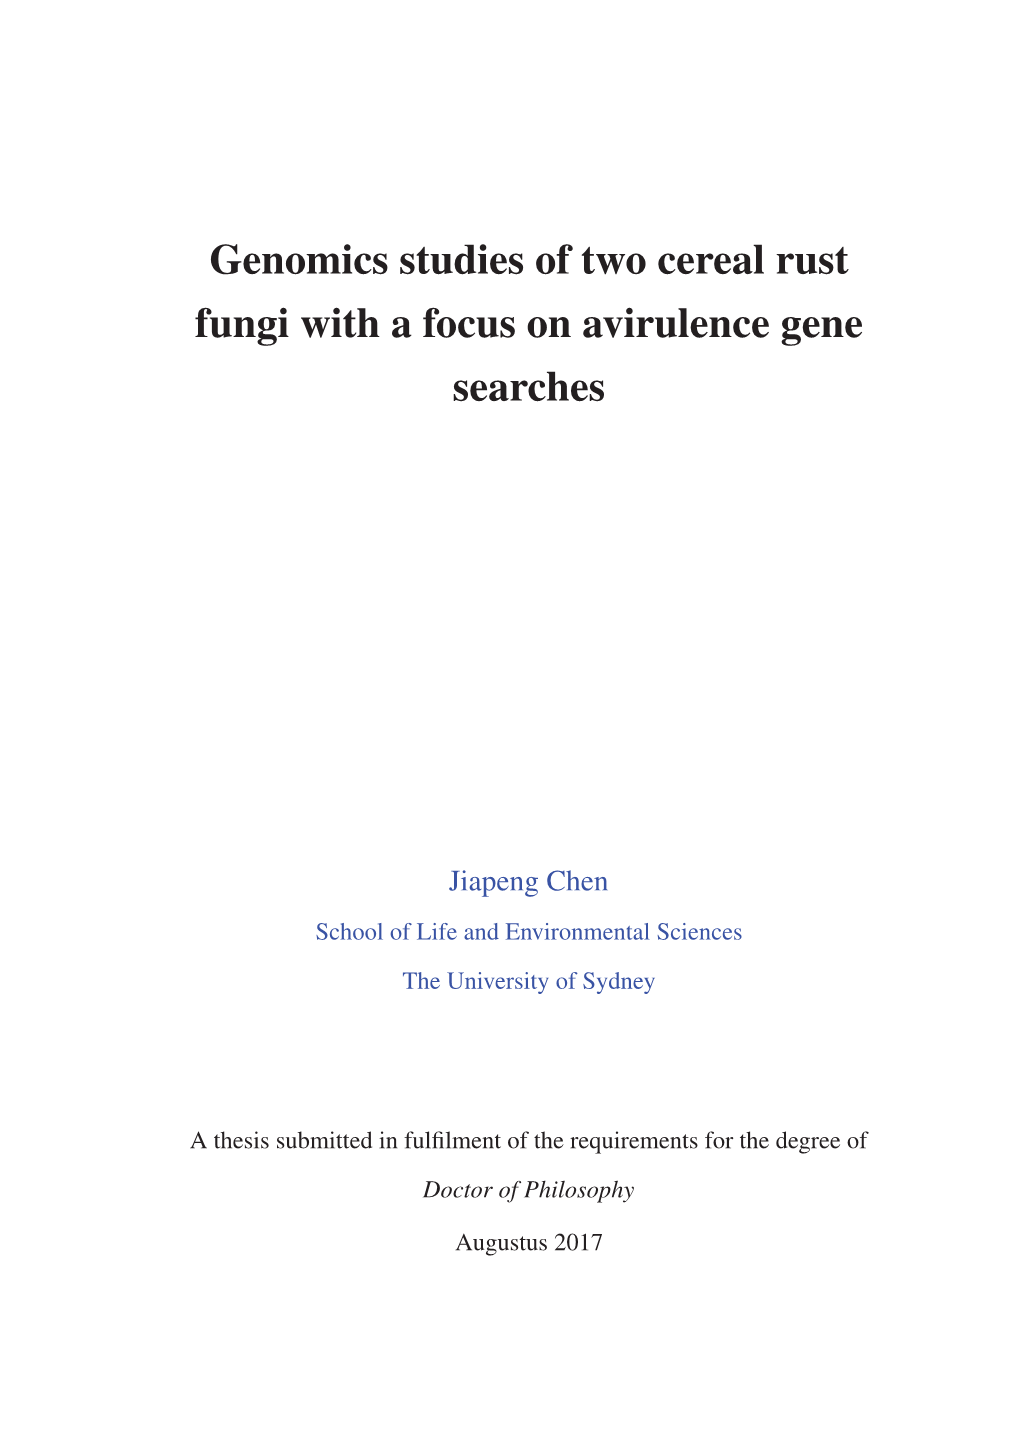 Genomics Studies of Two Cereal Rust Fungi with a Focus on Avirulence Gene Searches